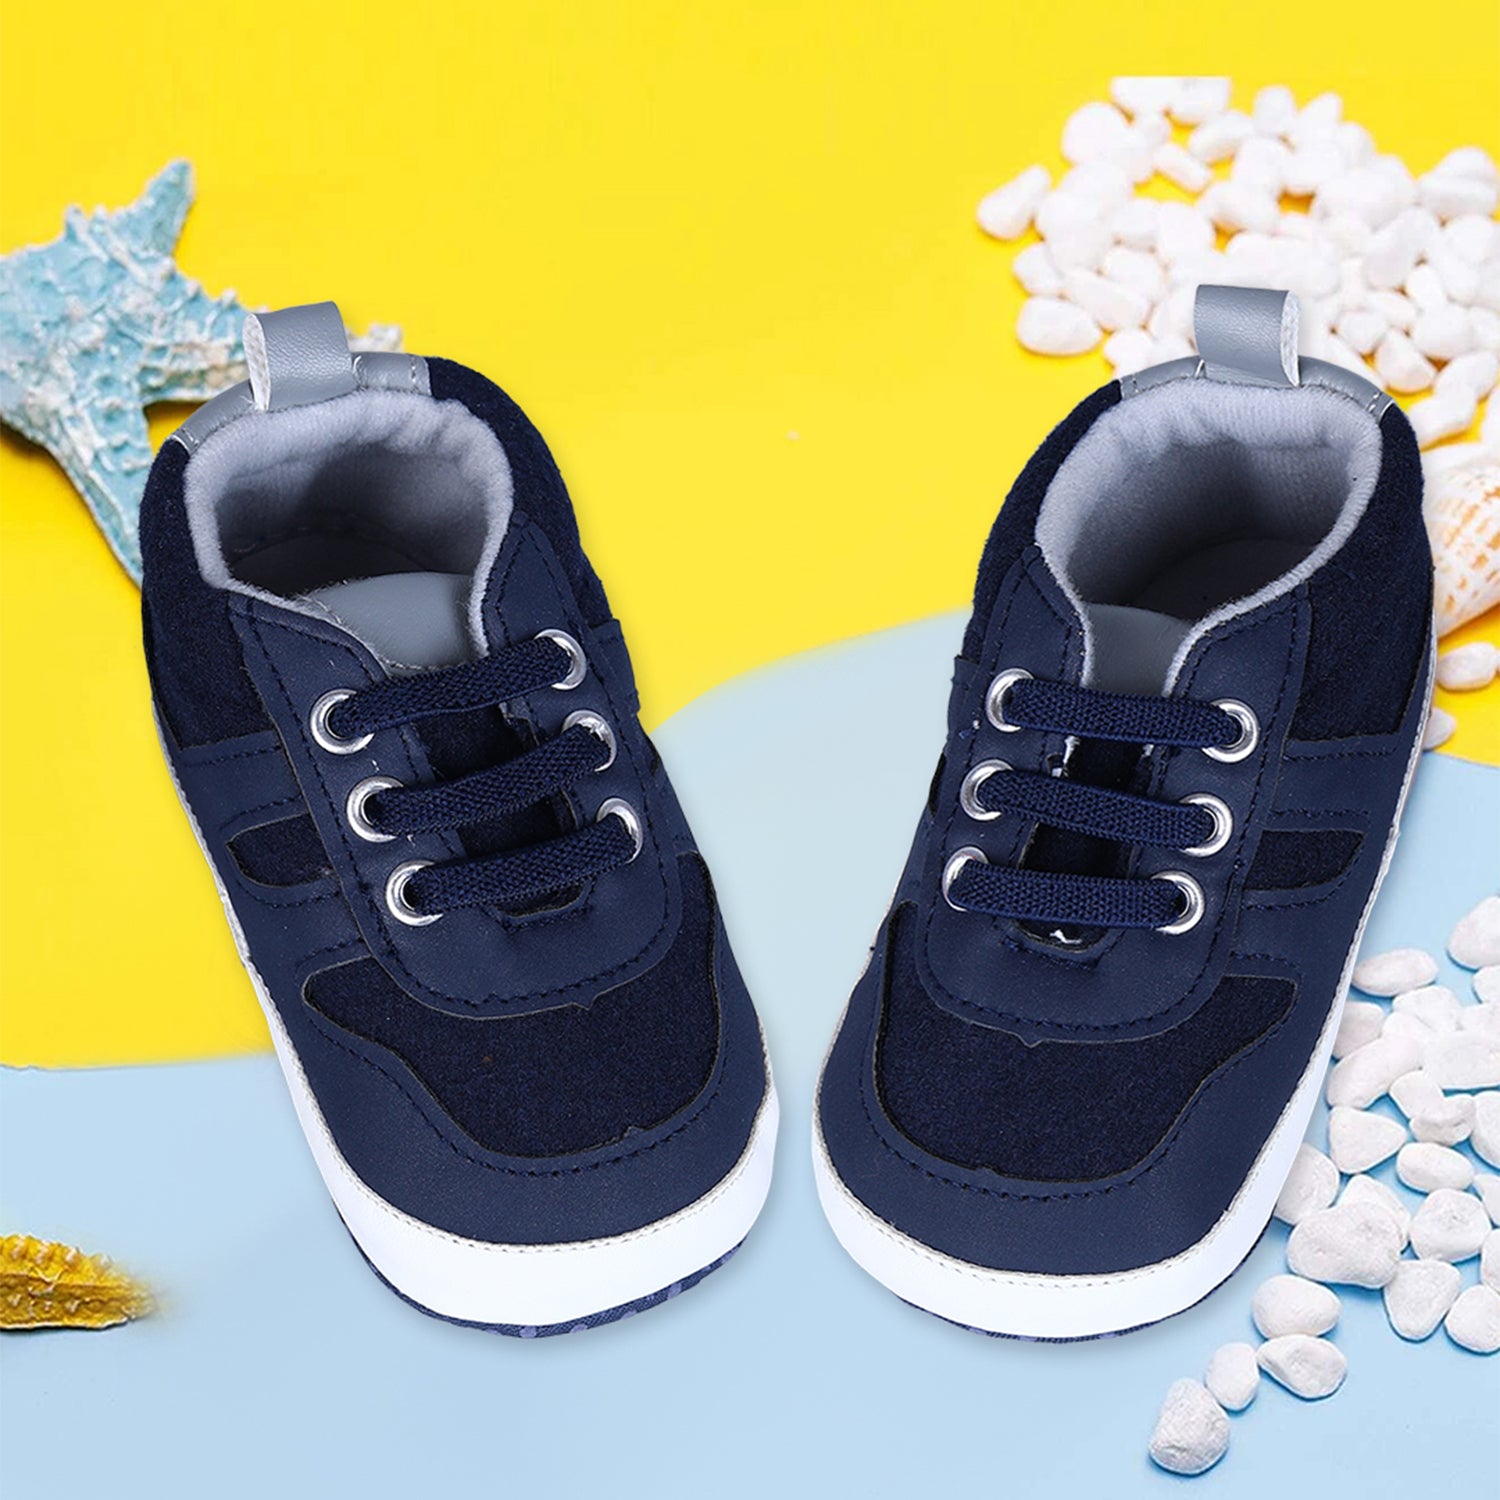 Lace-up Colour-blocked Comfortable Anti-Slip Sneaker Booties - Blue